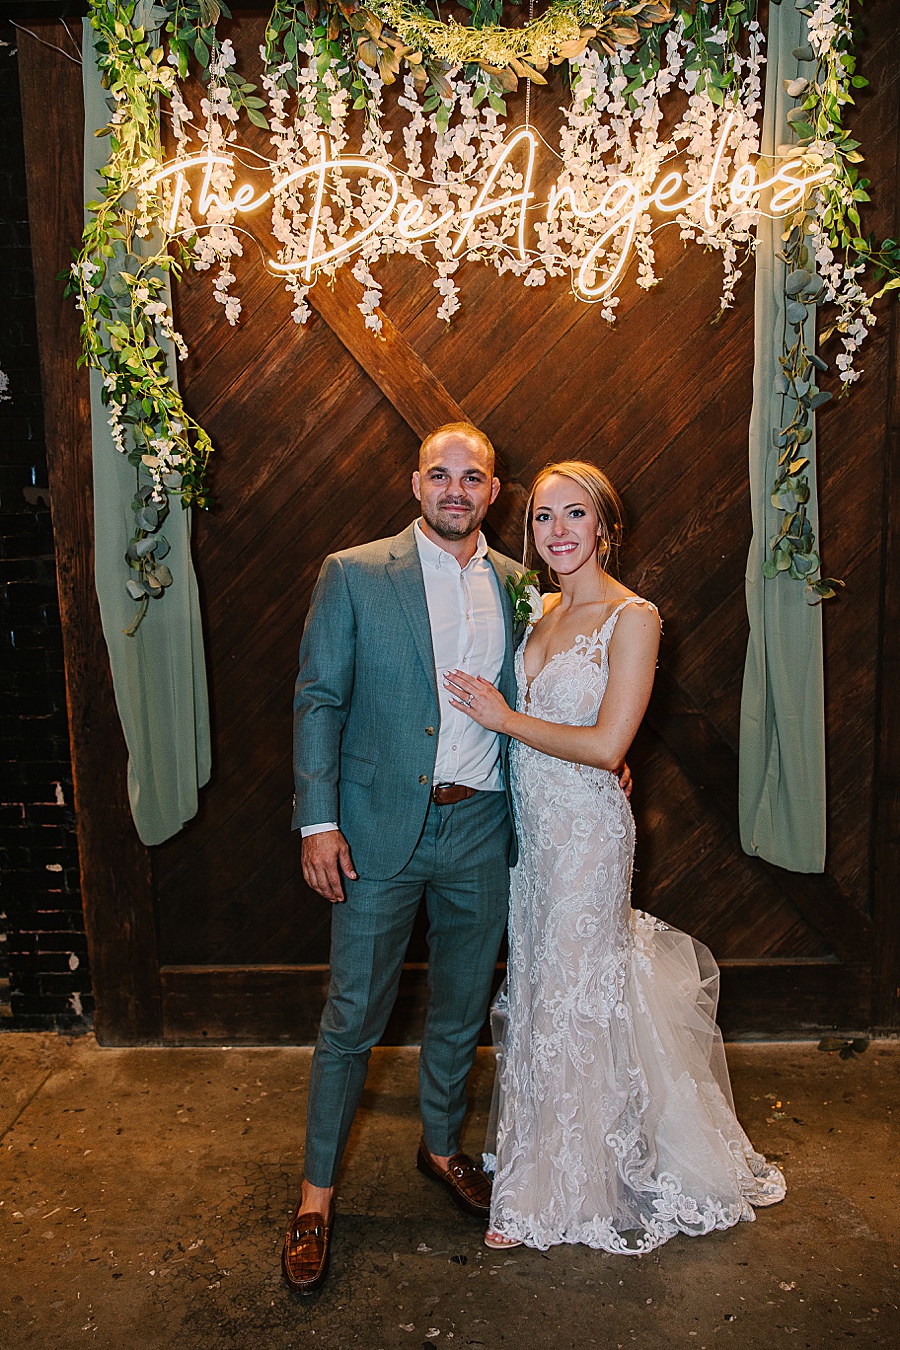 Bride & Groom with neon name sign at reception at Jackson Terminal events wedding in Knoxville TN by Mandy Hart Photo, Knoxville TN Wedding Photographer